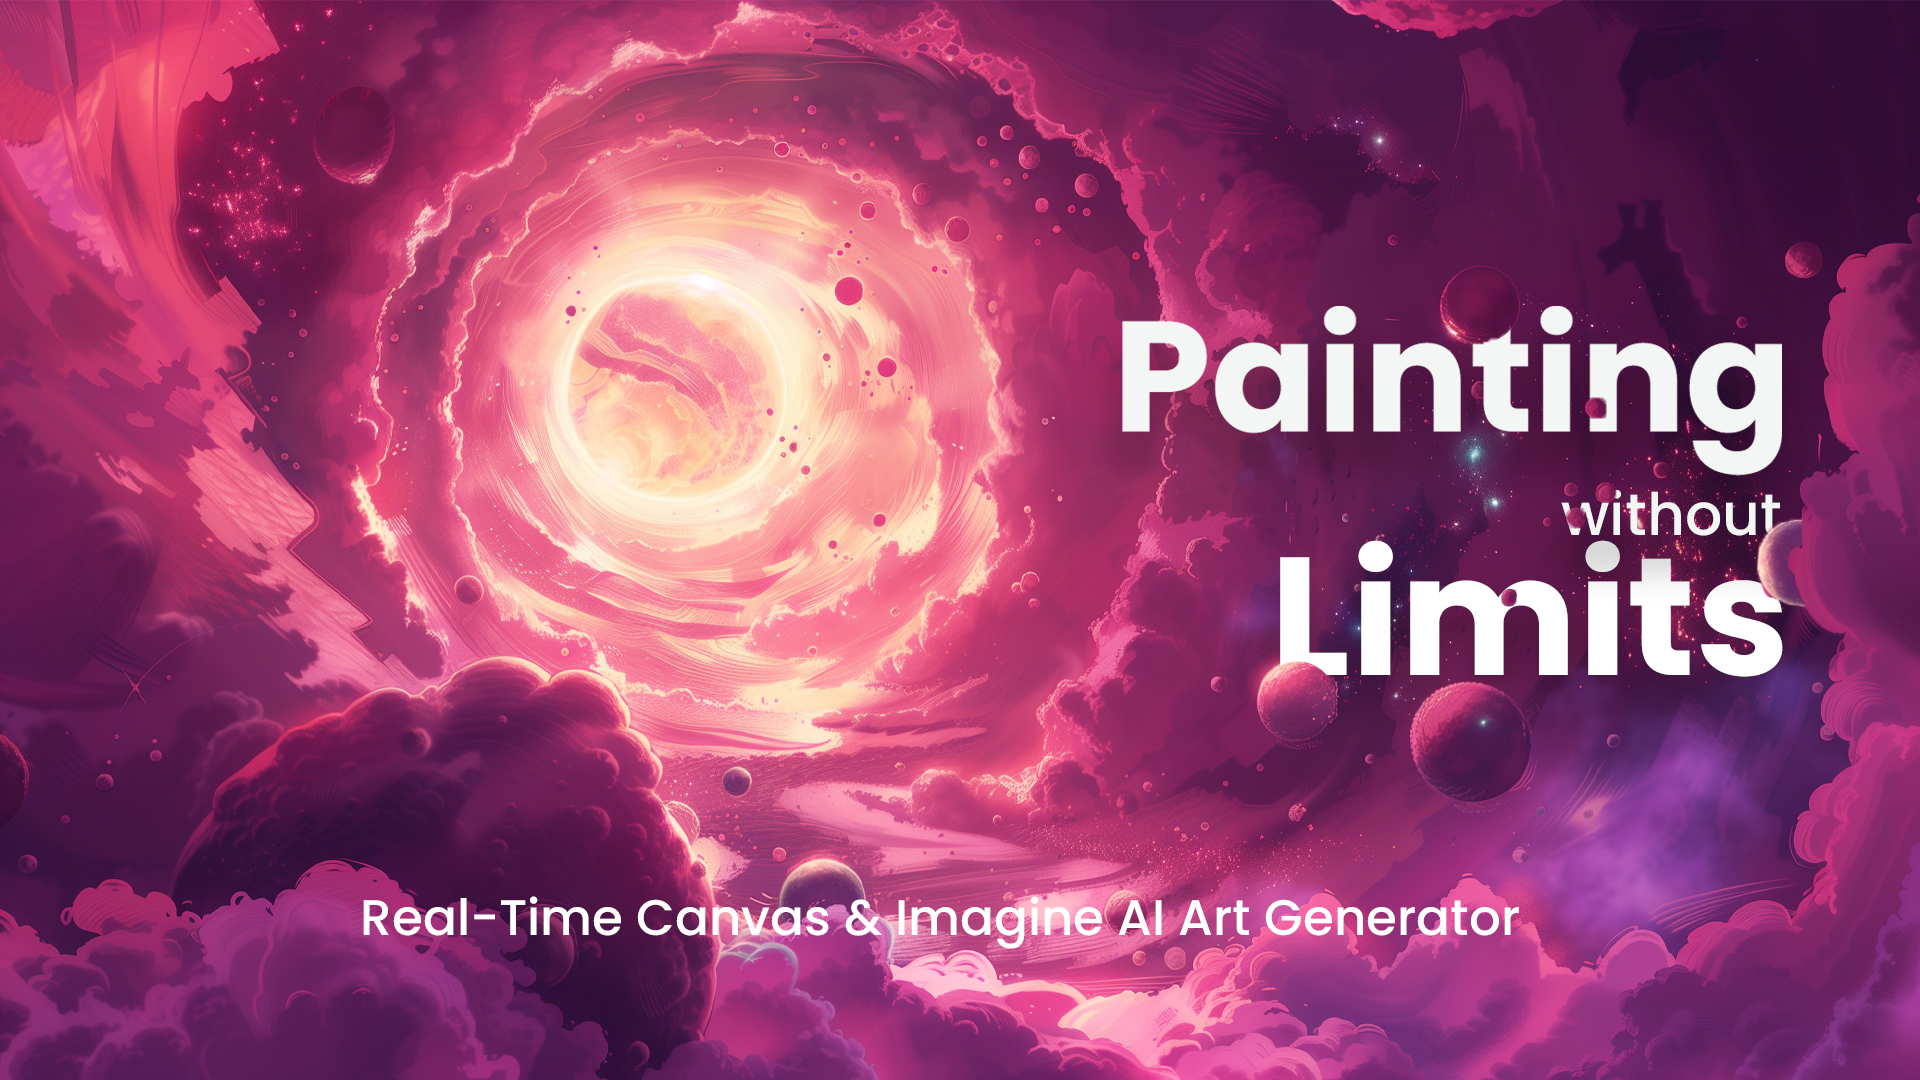 Painting without Limits: Ideate & Imagine AI Art Generator